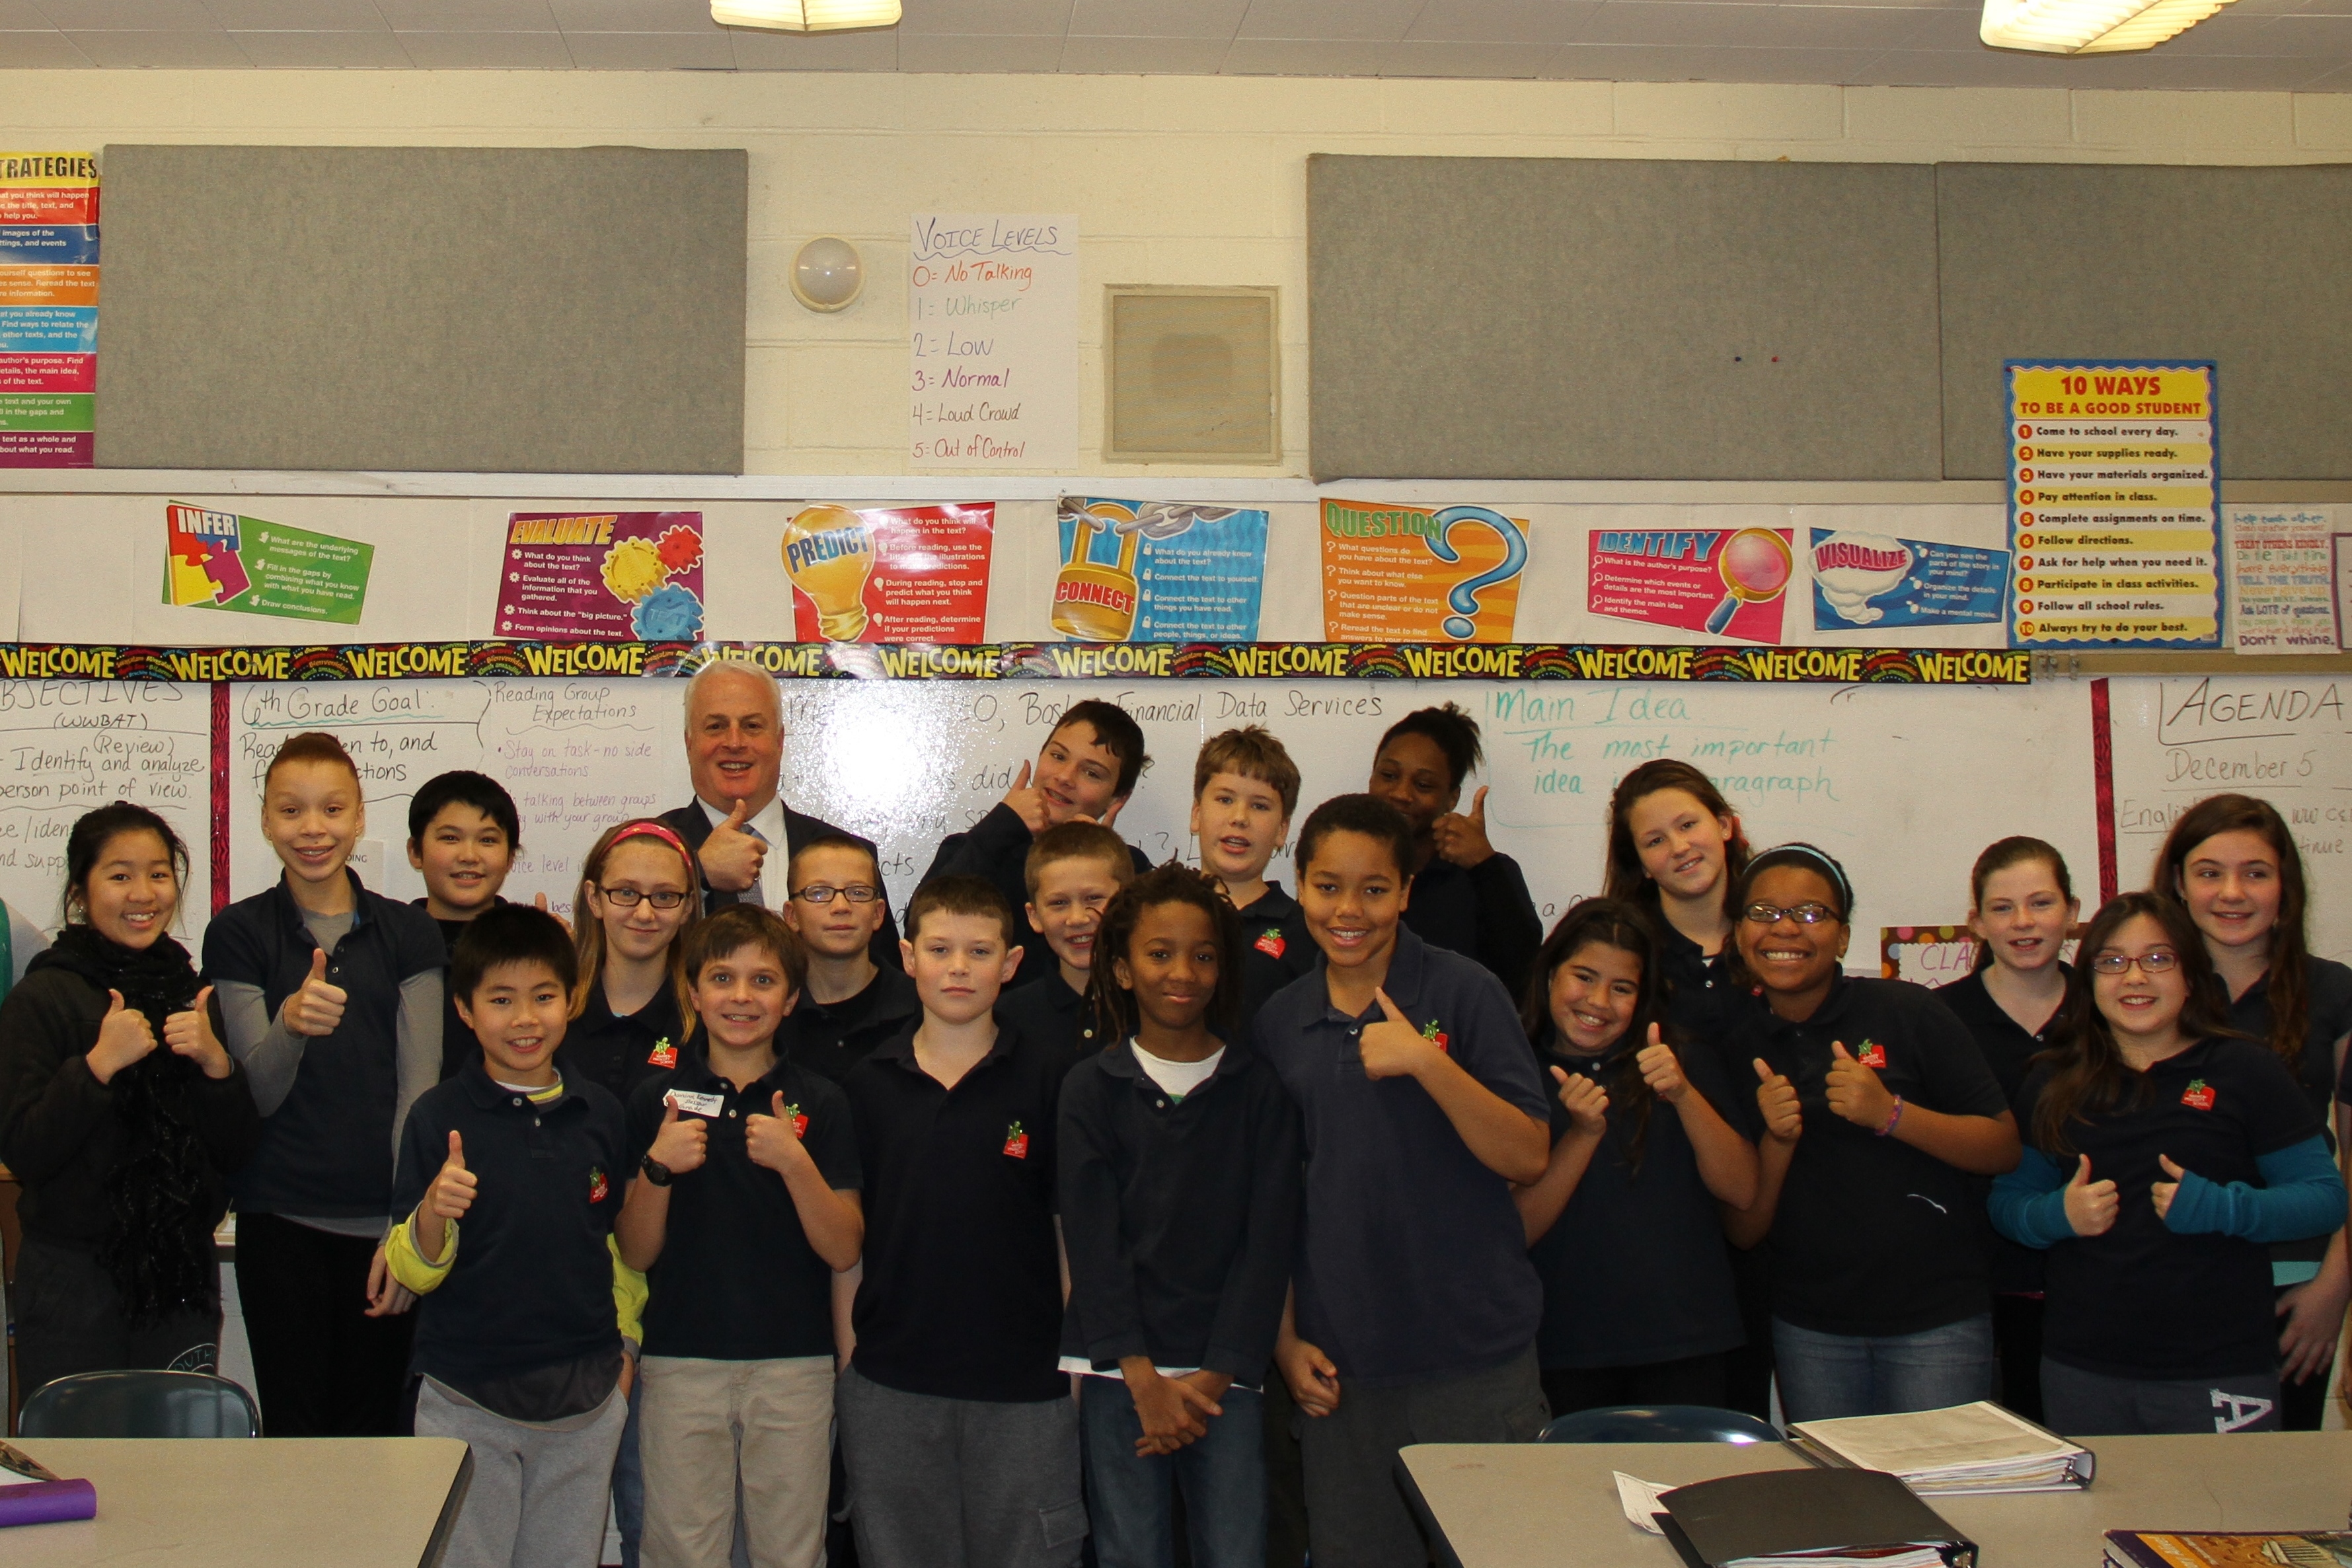 Terry Metzger, President & CEO of Boston Financial Data Services, has a laugh with a 6th grade class at the Warren Prescott School 